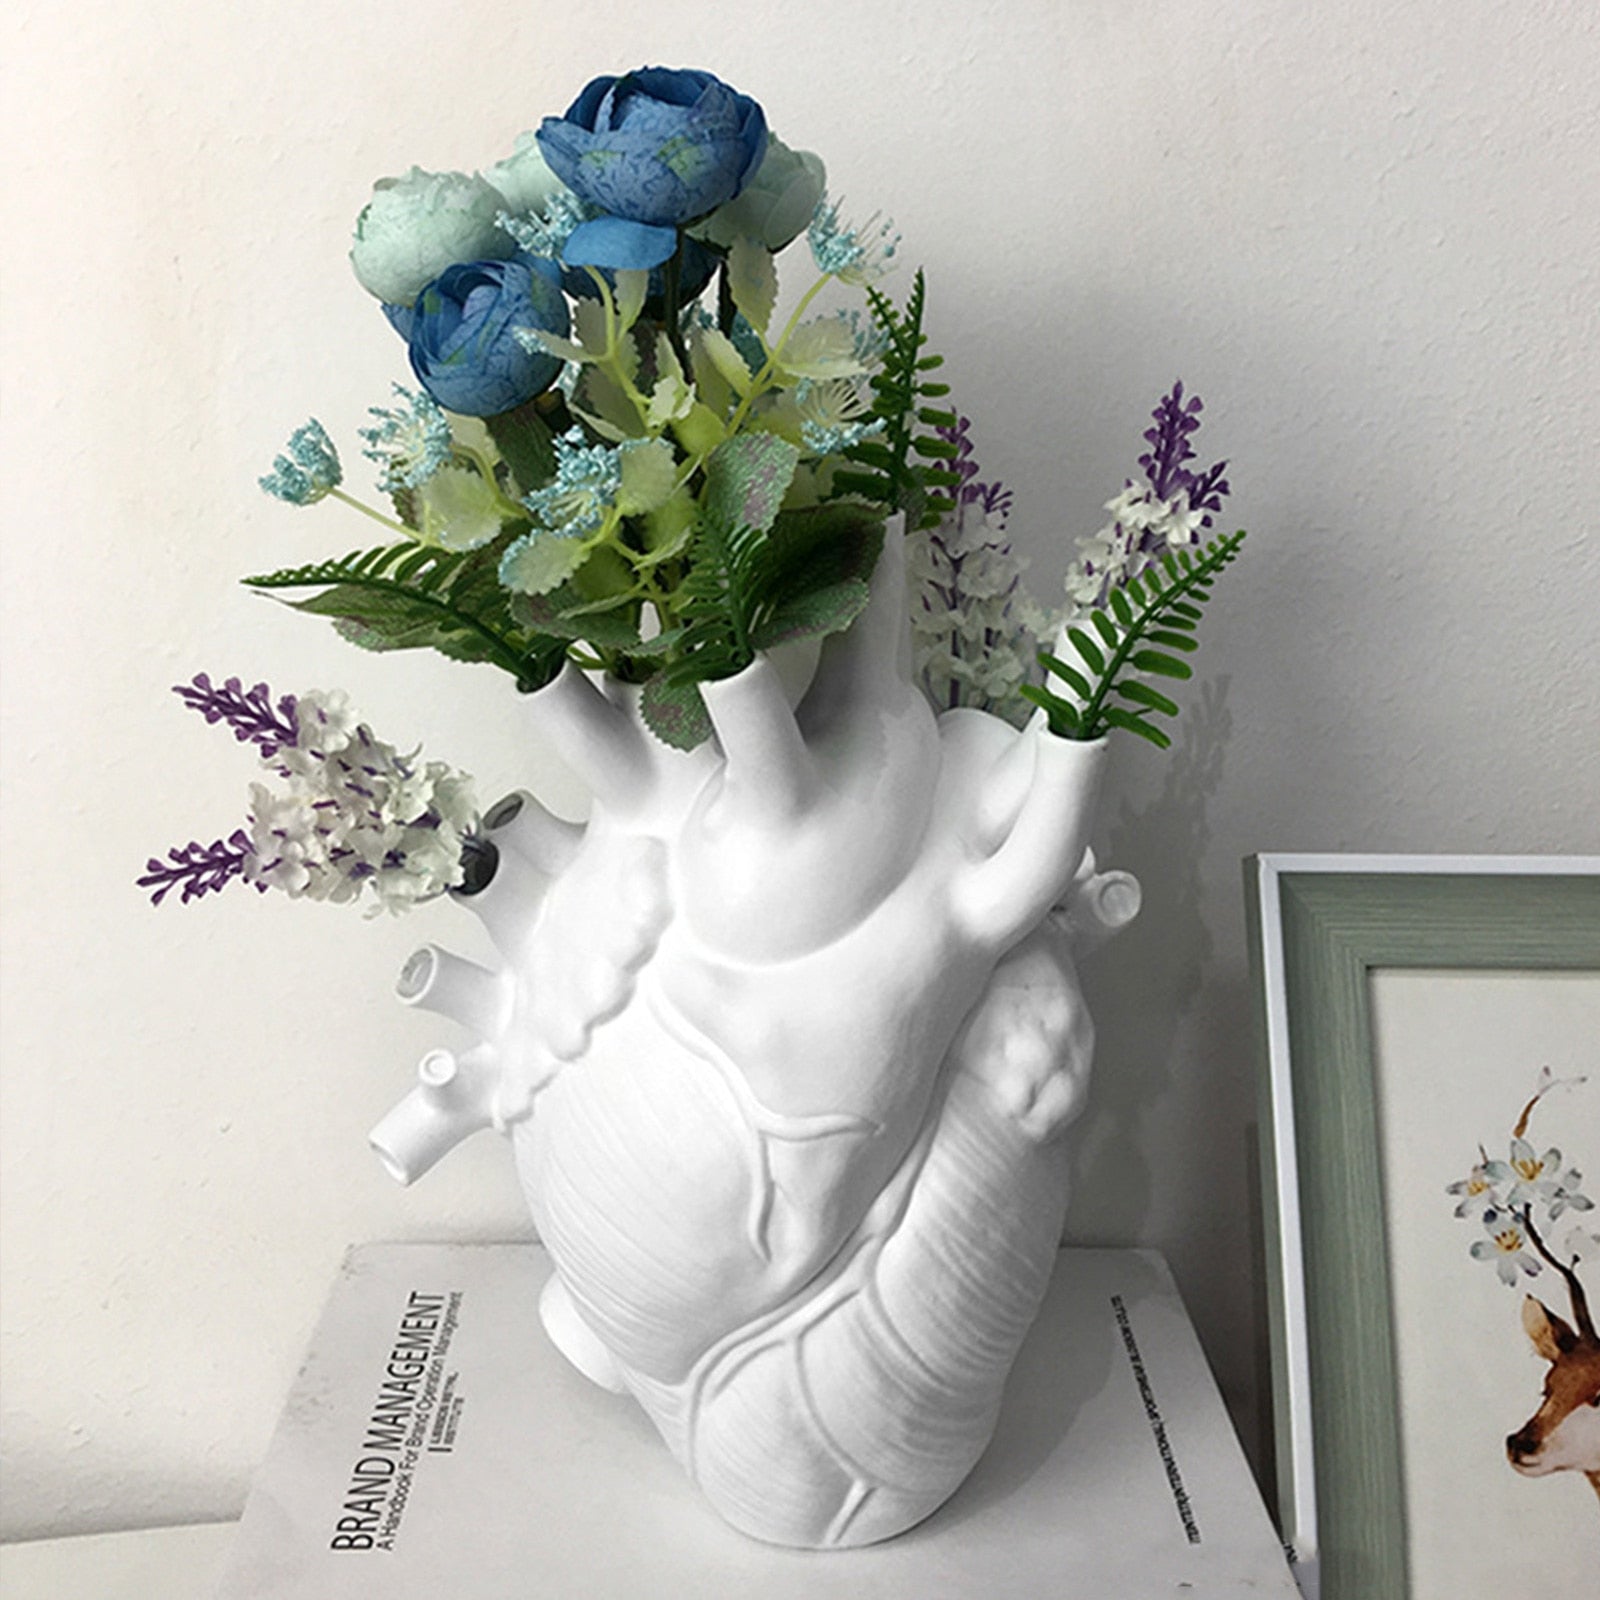 The heart-shaped vase is styled with light blue flowers and green foliage, displayed on a shelf next to a picture frame, showcasing its decorative and functional design.